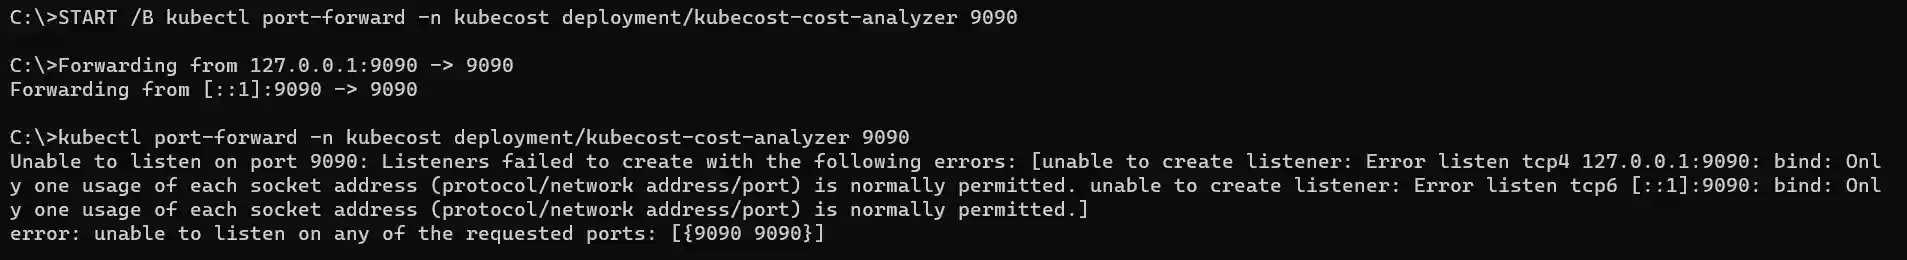 Screenshot of the error message being displayed during kubectl port-forward command for an orphaned port in Windows